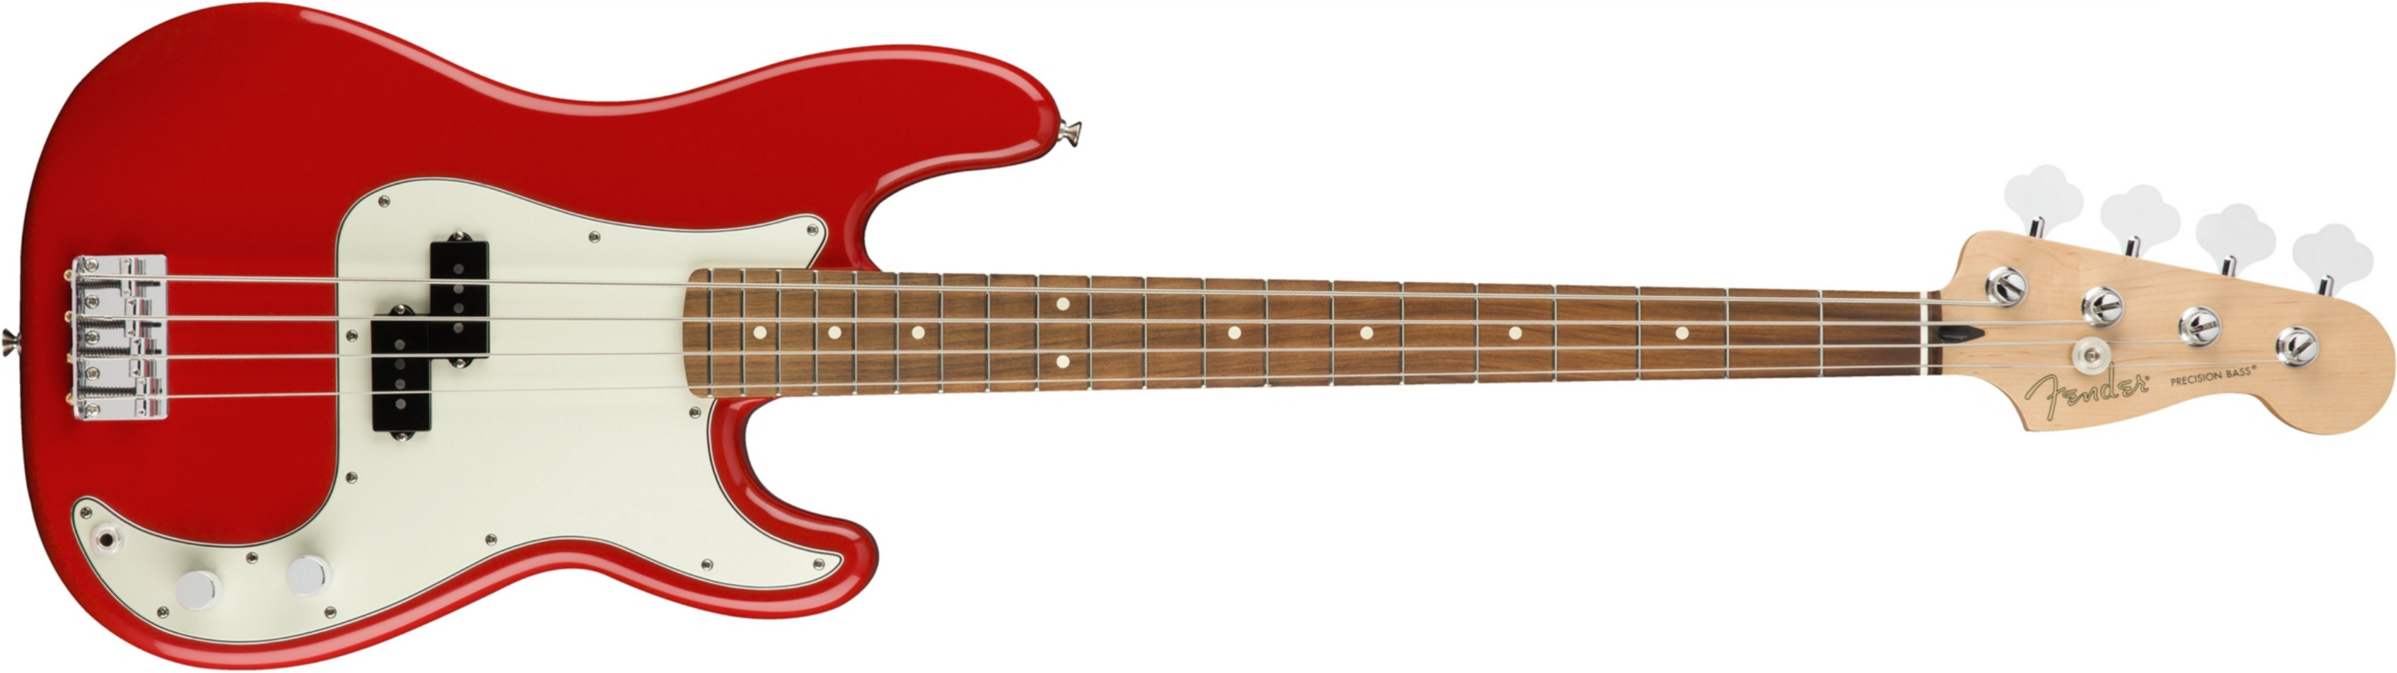 Fender Precision Bass Player Mex Pf - Sonic Red - Solid body electric bass - Main picture